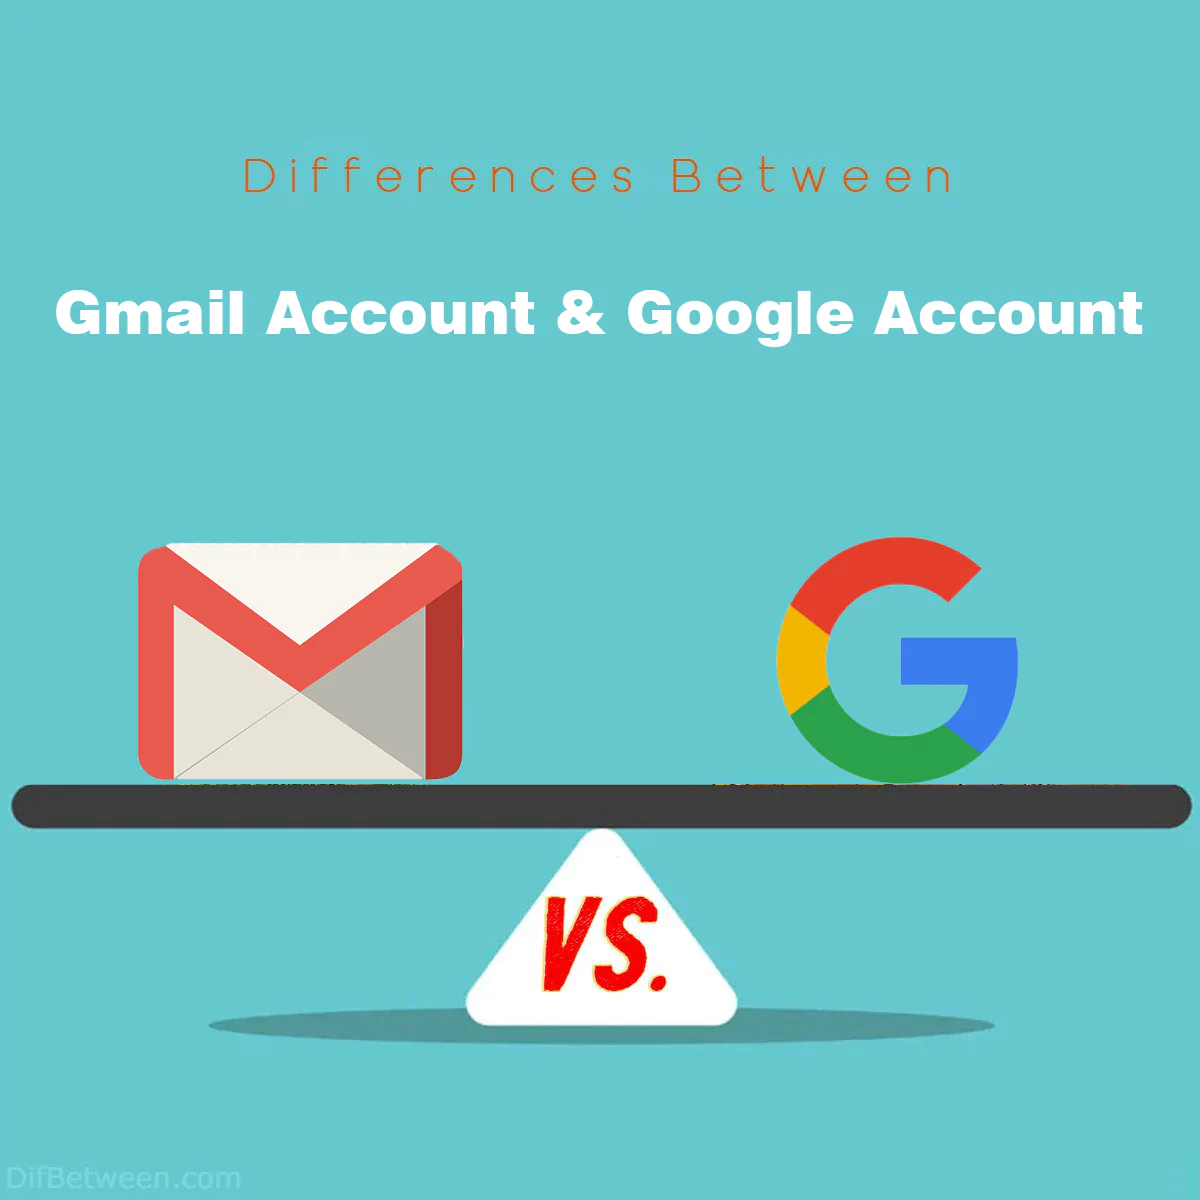 Differences Between Gmail Account and Google Account